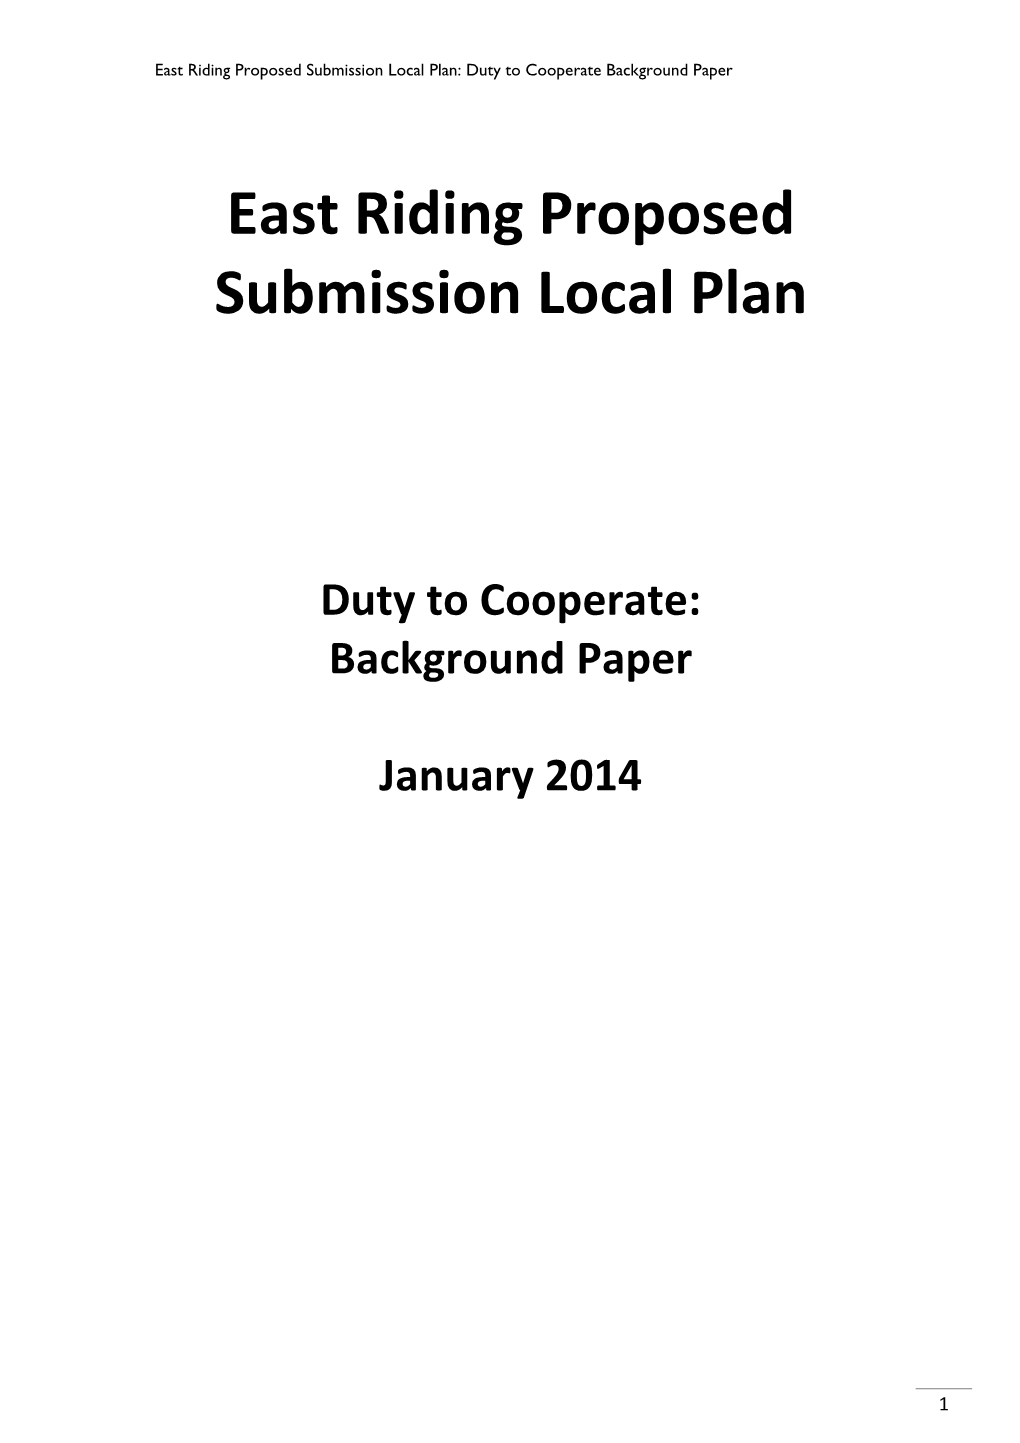 East Riding Proposed Submission Local Plan: Duty to Cooperate Background Paper